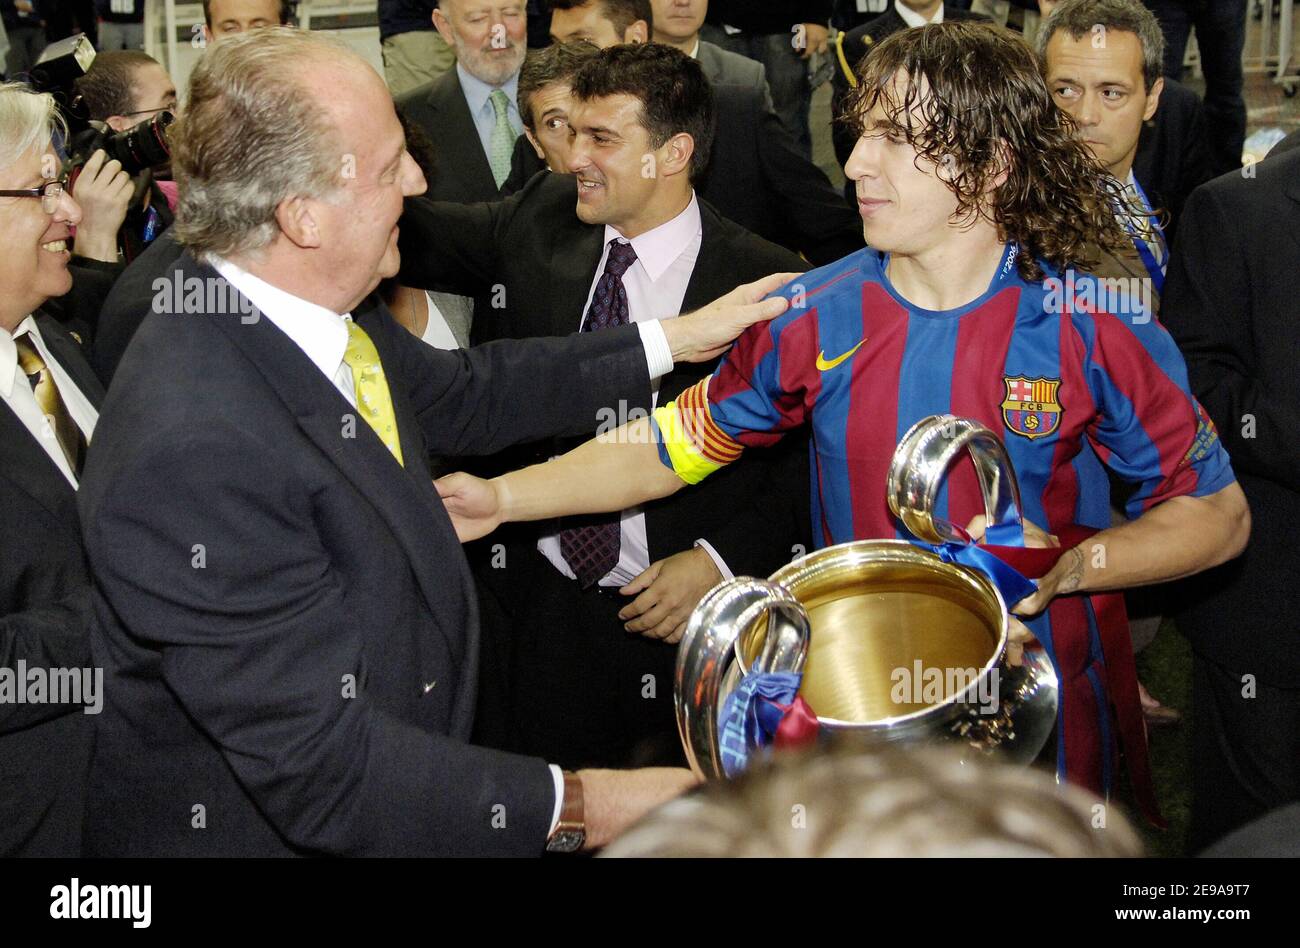 Barcelona's Carles Puyol congratulated by the King of Spain Juan Carlos during the Champions League final, Barcelona vs Arsenal, at the Stade de France, in Saint Denis, near Paris, France, on May 17, 2006. Barcelona won 2-1. Photo by Nicolas Gouhier/CAMELEON/ABACAPRESS.COM Stock Photo